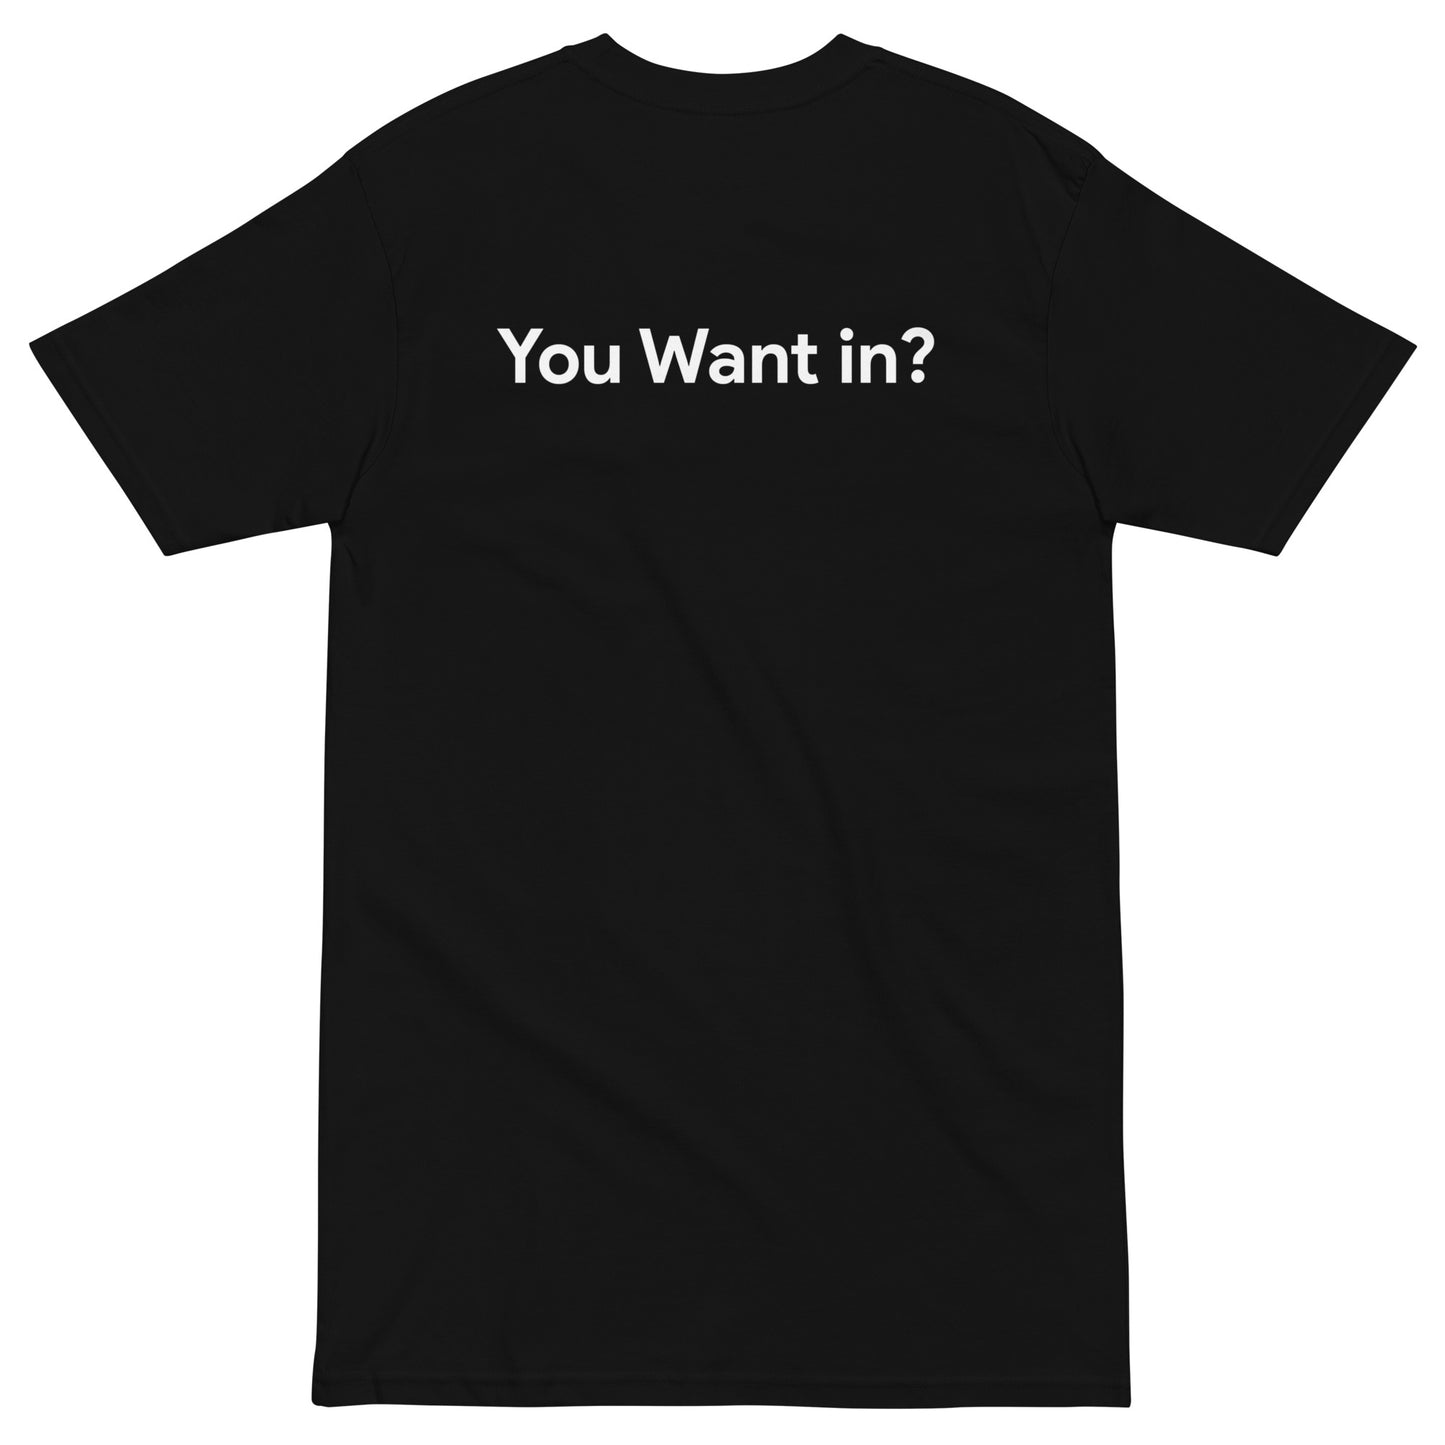 You Want in? Verse Shirt